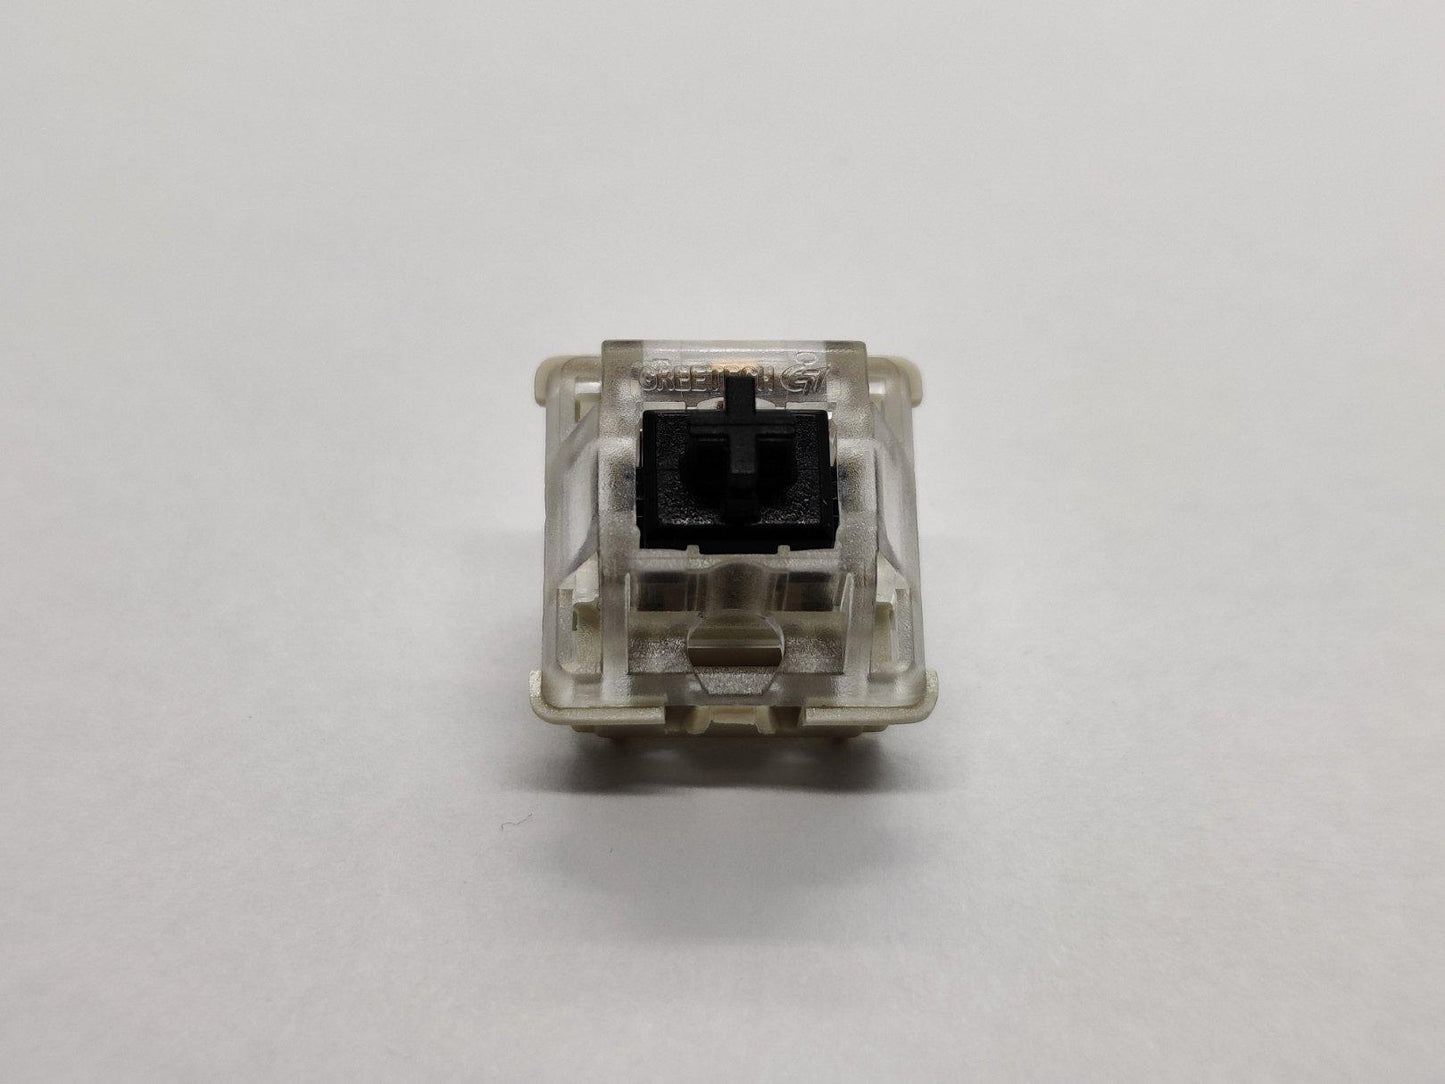 Greetech Black - White and Clear Housing - Through Hole - 3 pin